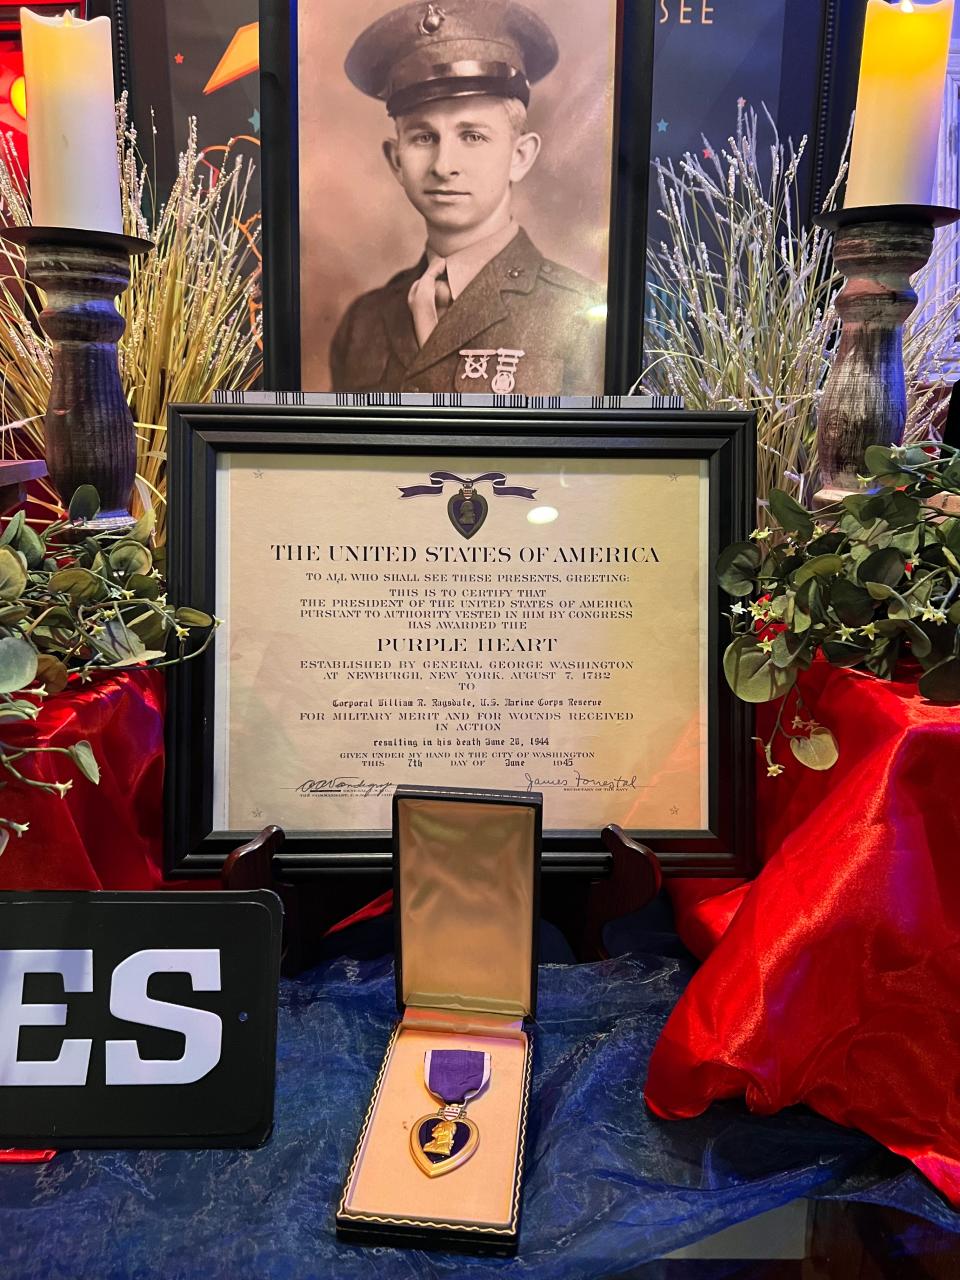 The Purple Heart given to Cpl. William Ragsdale's widow, Eloise, is displayed at his visitation 78 years after his death.